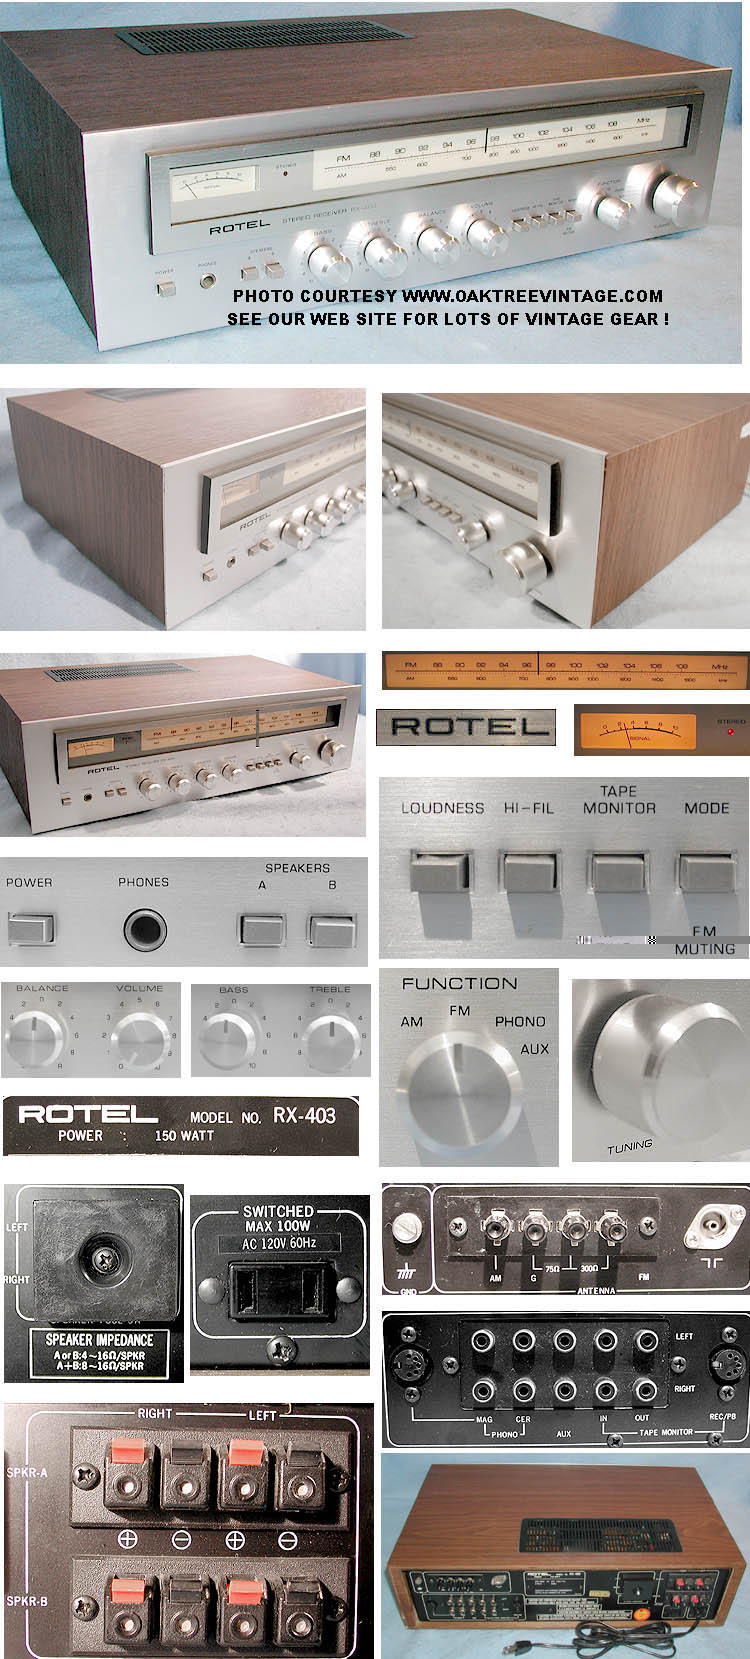 Rotel_RX-403_Stereo_Receiver_collage.jpg